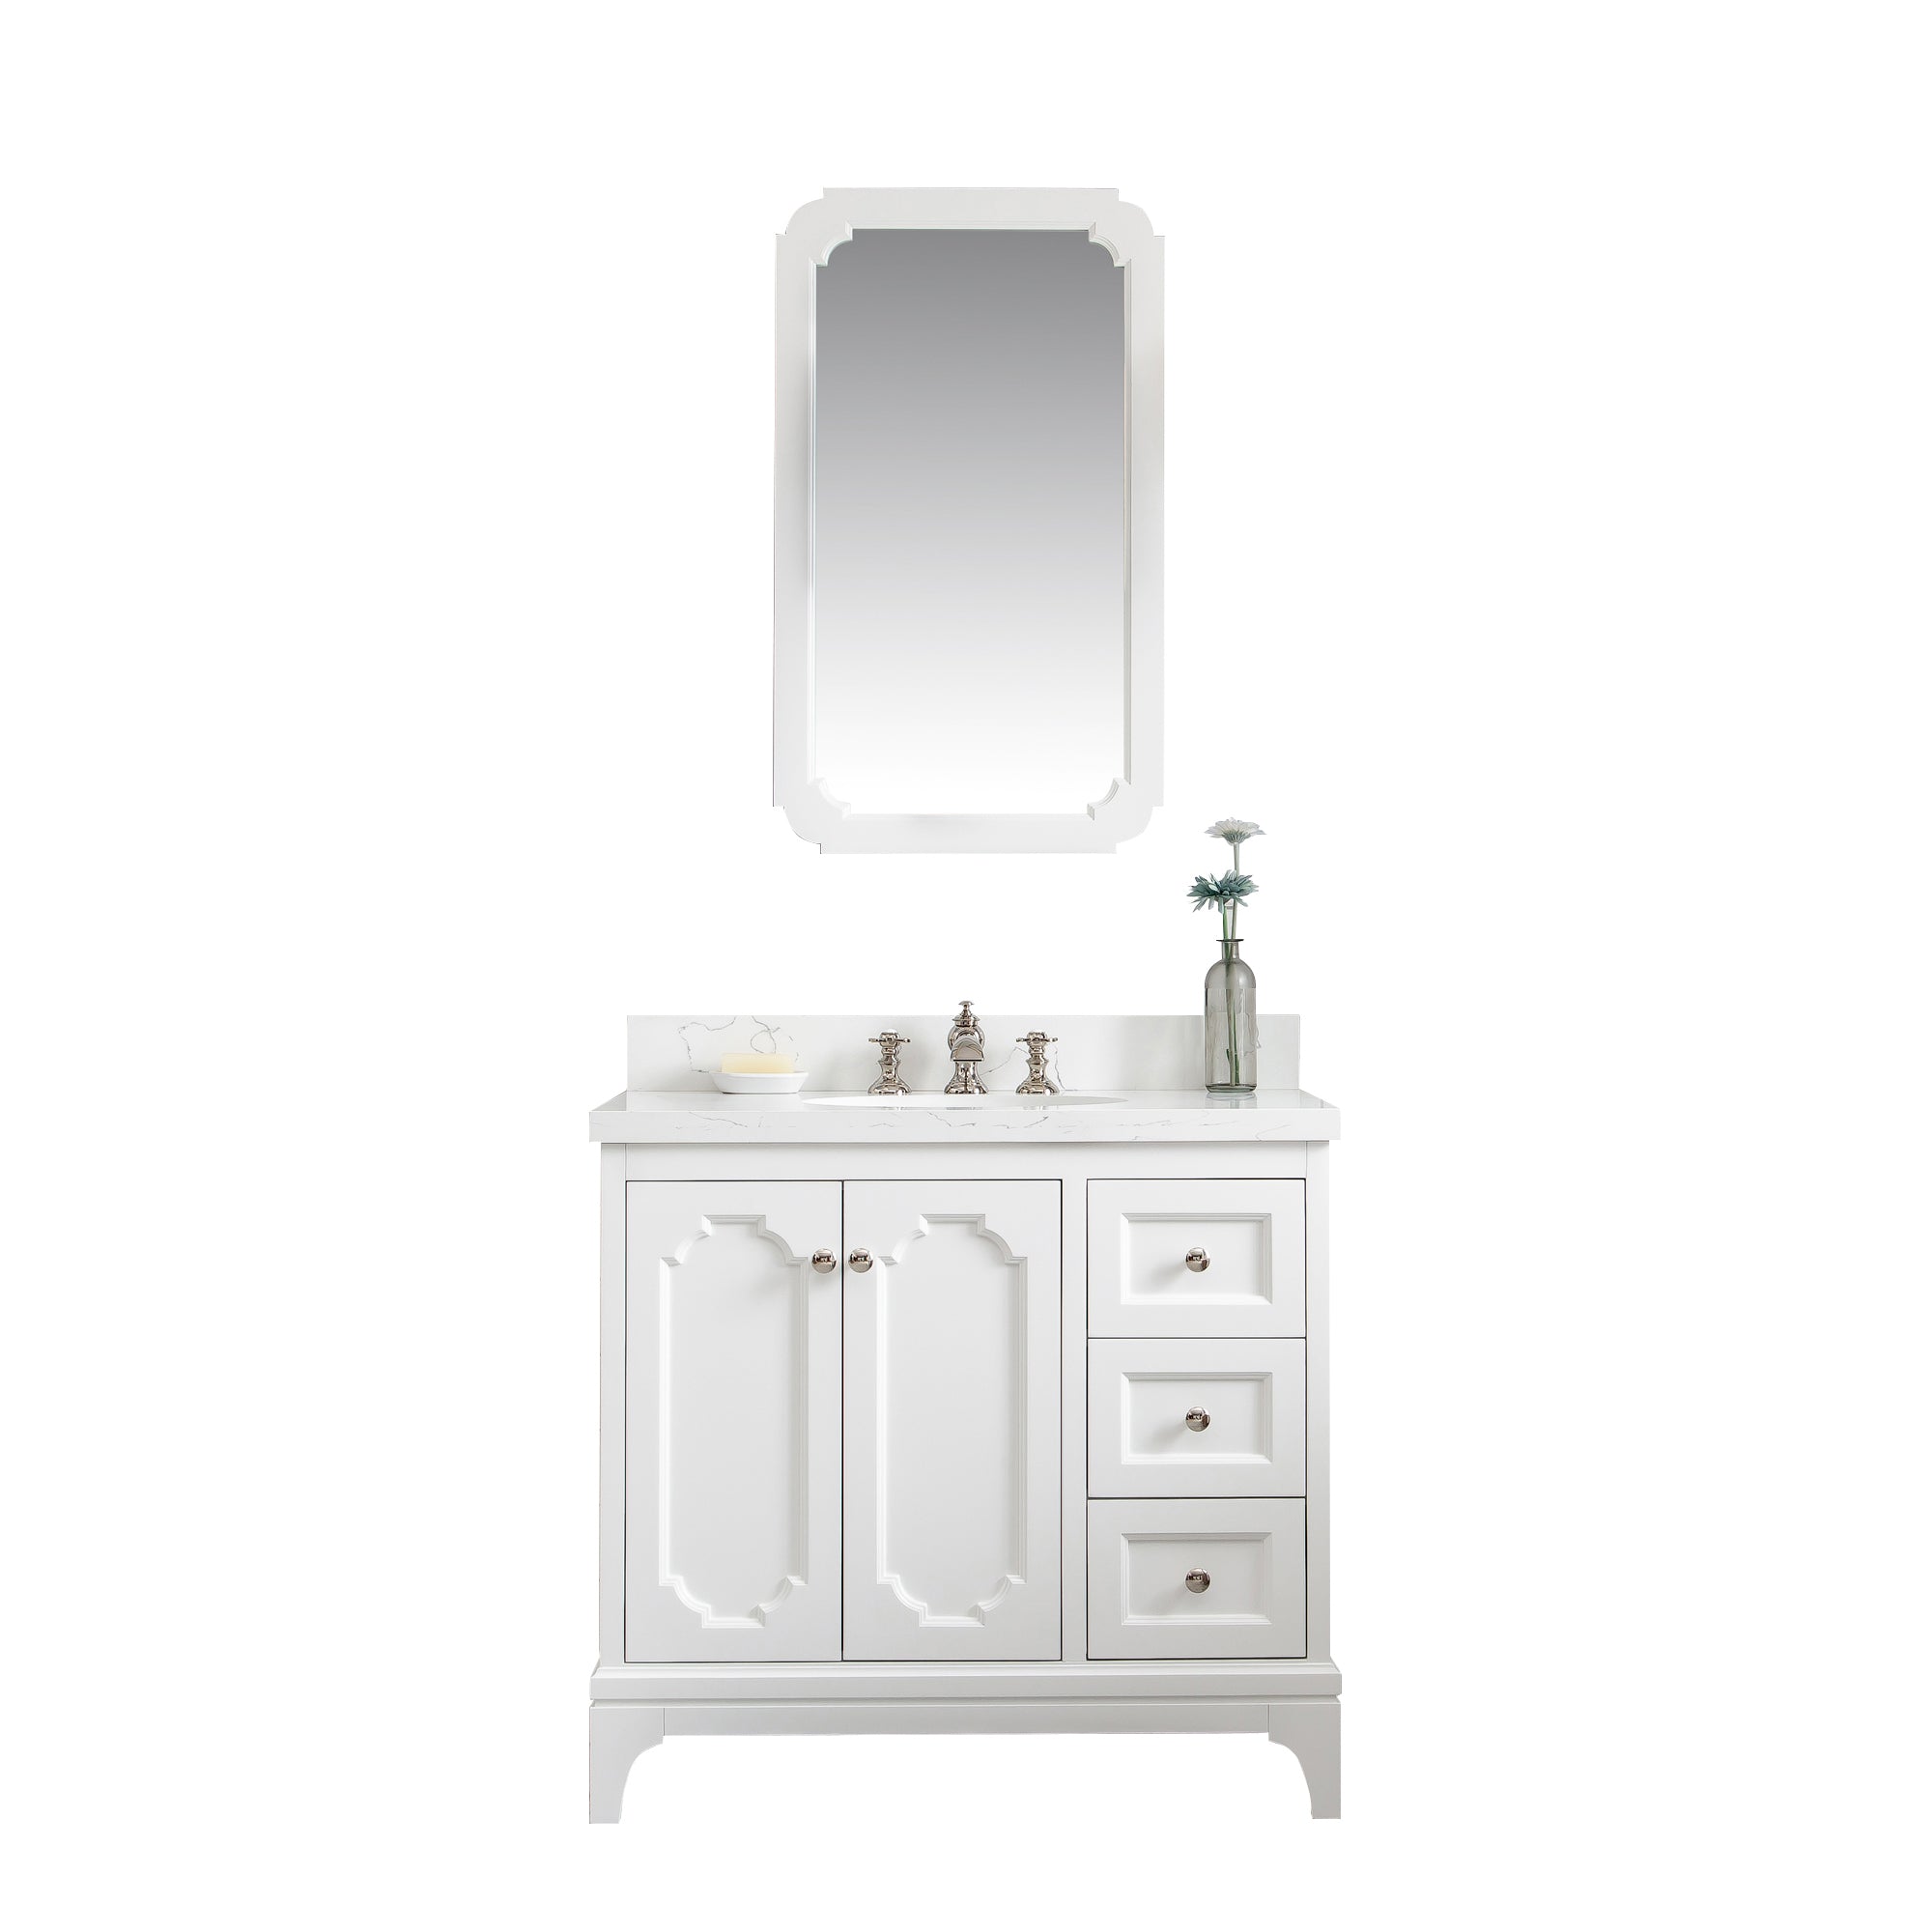 Water Creation | Queen 36-Inch Single Sink Quartz Carrara Vanity In Pure White With Matching Mirror(s) and F2-0013-05-FX Lavatory Faucet(s) | QU36QZ05PW-Q21FX1305